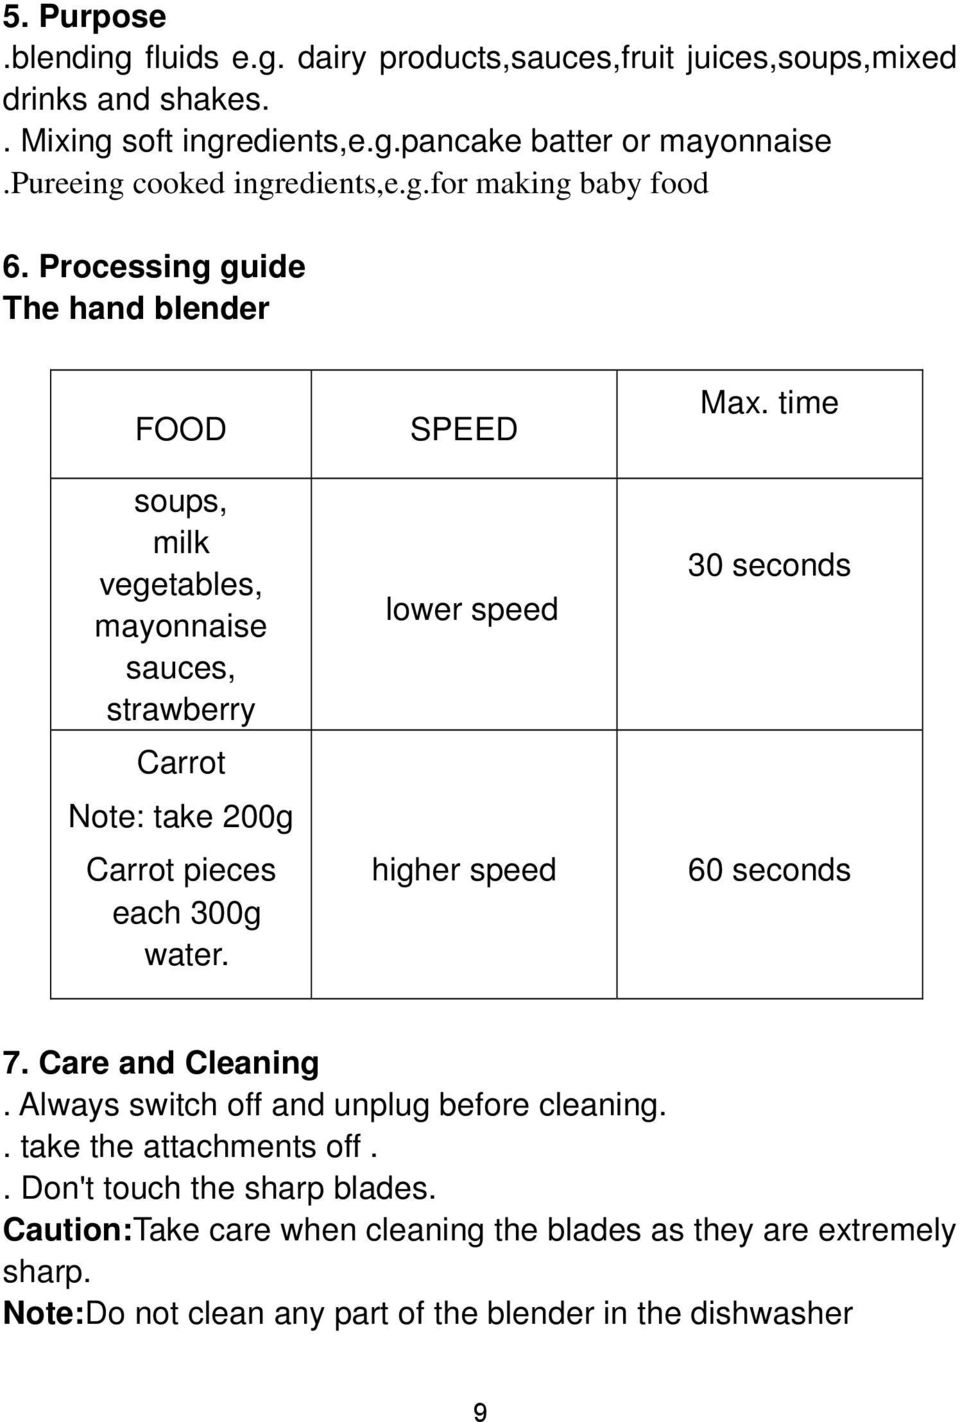 Processing guide The hand blender FOOD soups, milk vegetables, mayonnaise sauces, strawberry Carrot Note: take 200g Carrot pieces each 300g water.